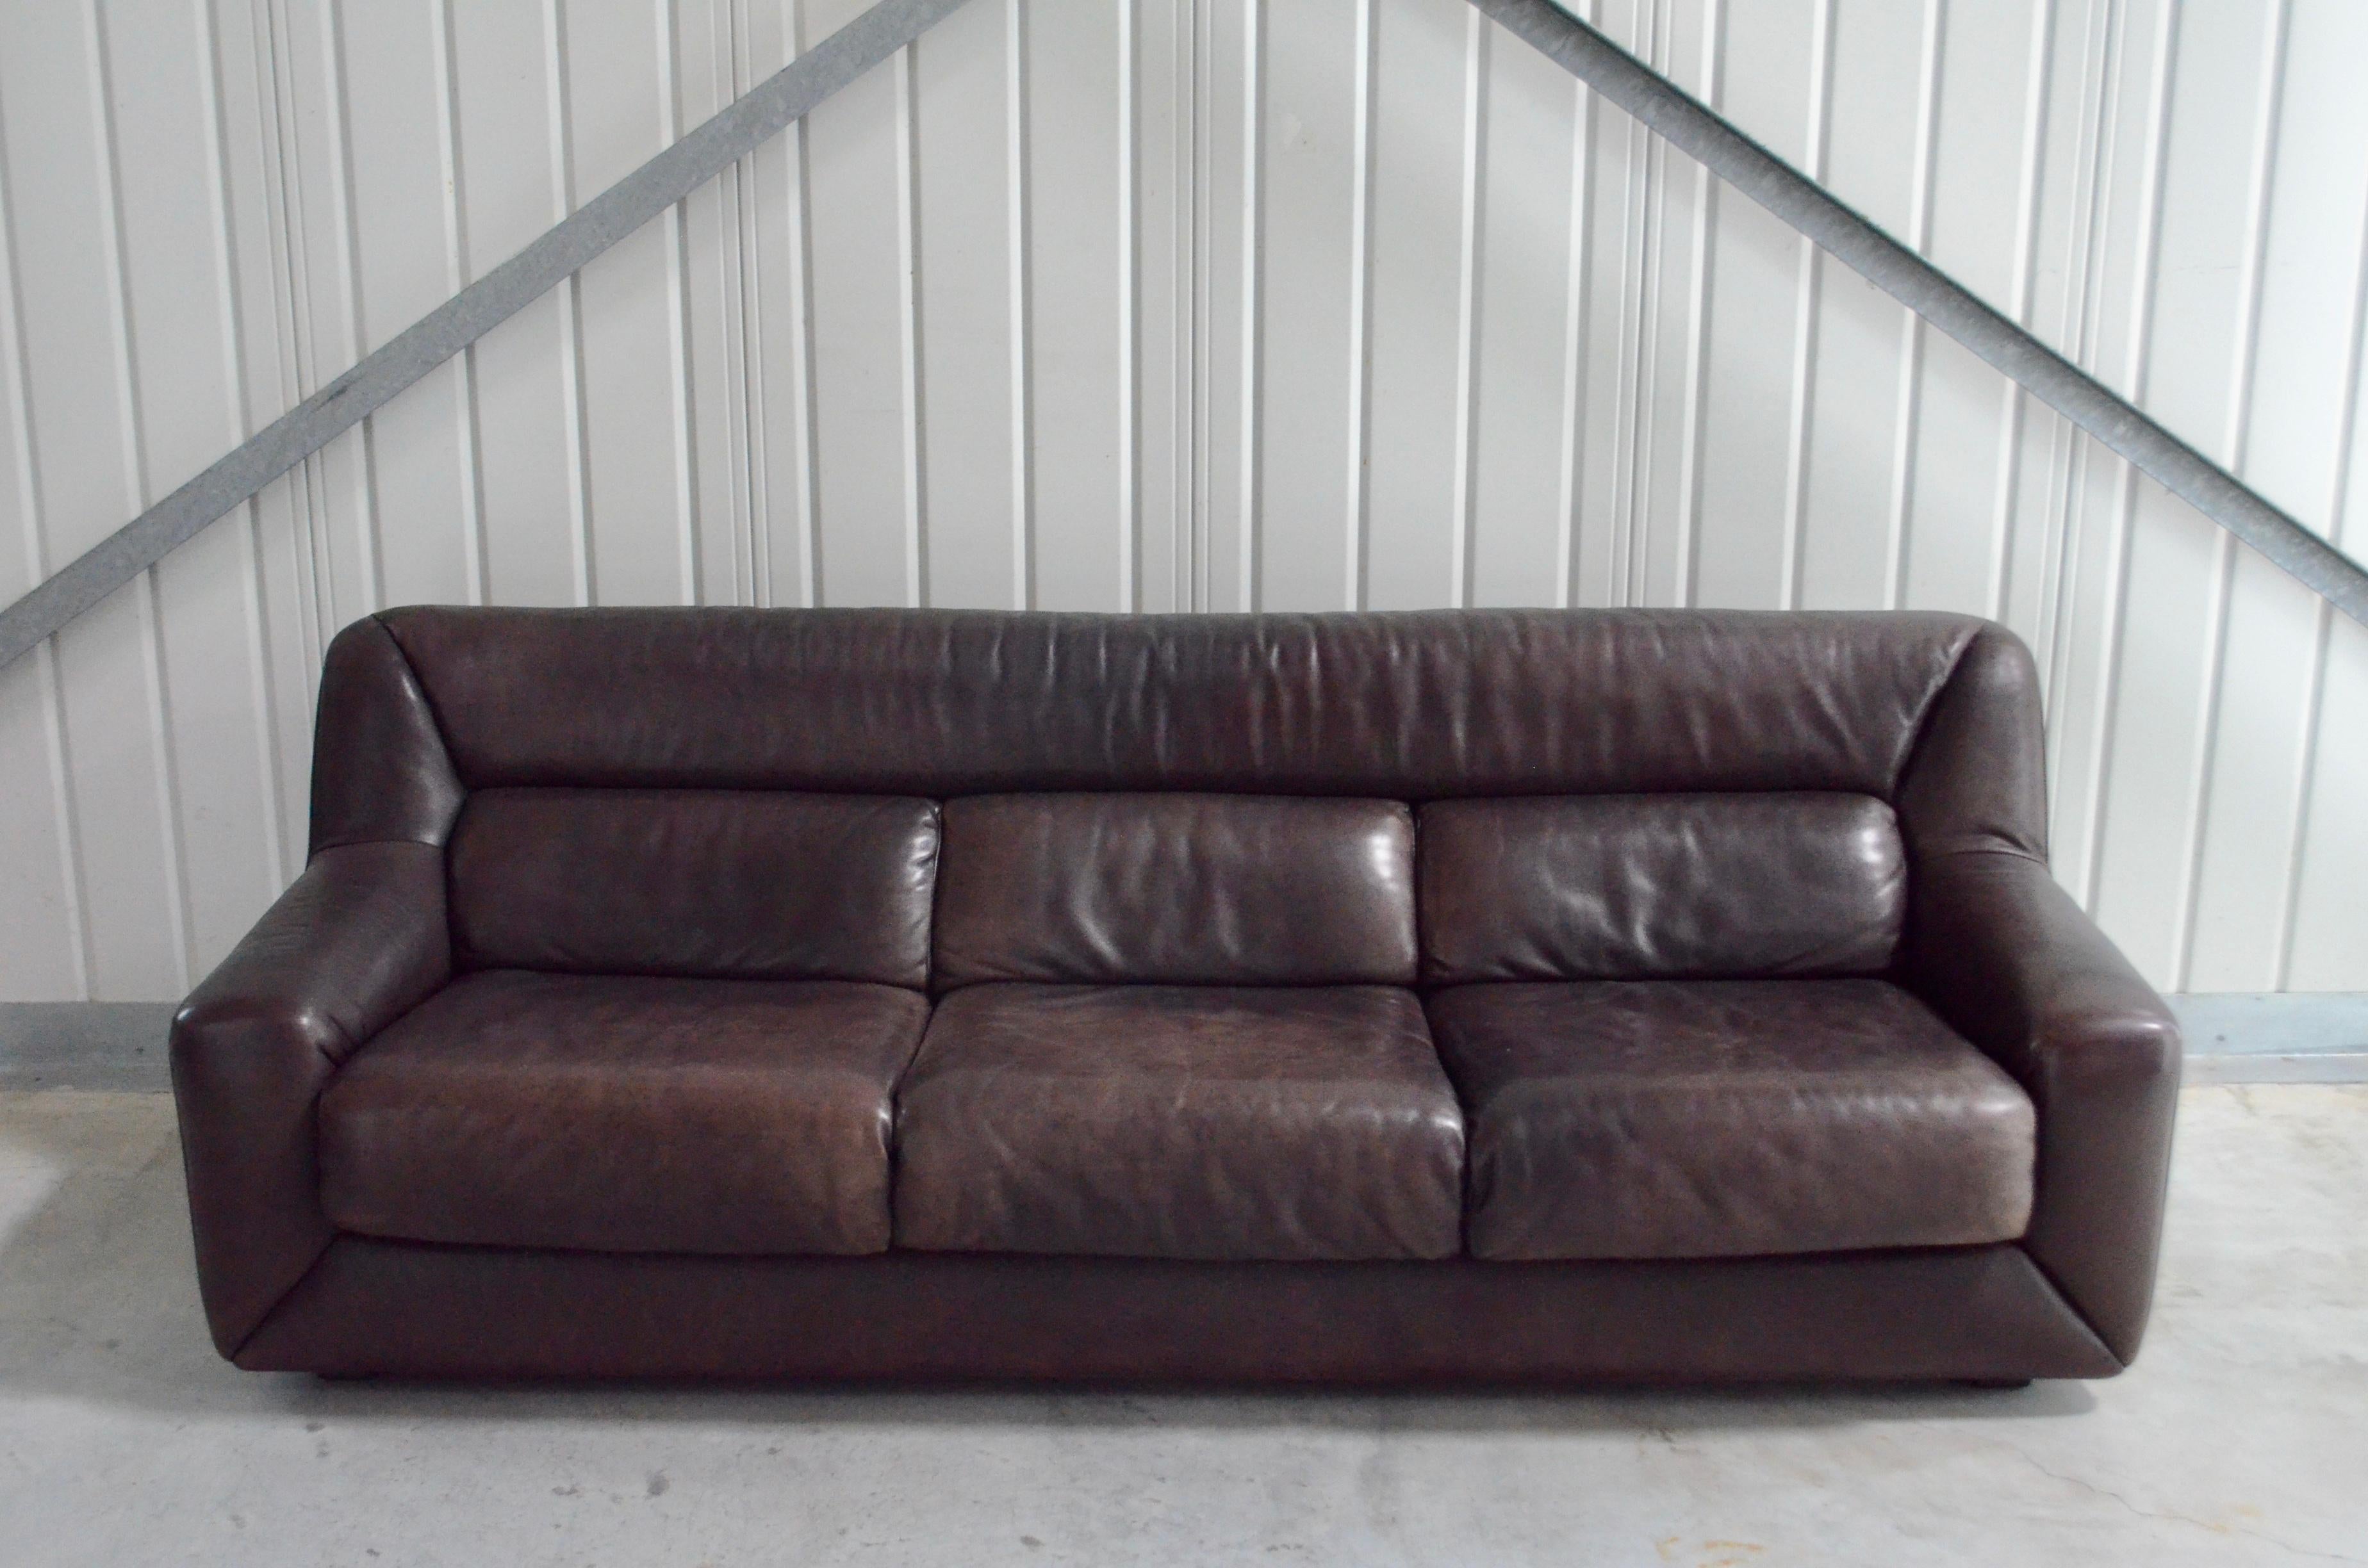 De Sede leather sofa Model DS 43.
Soft Aniline leather in a stunning darkbrown color.
Great vintage condition.All 3 seats are extendable for much more lounge comfort.
I´ts a rare De sede model.
Hard to find.



  